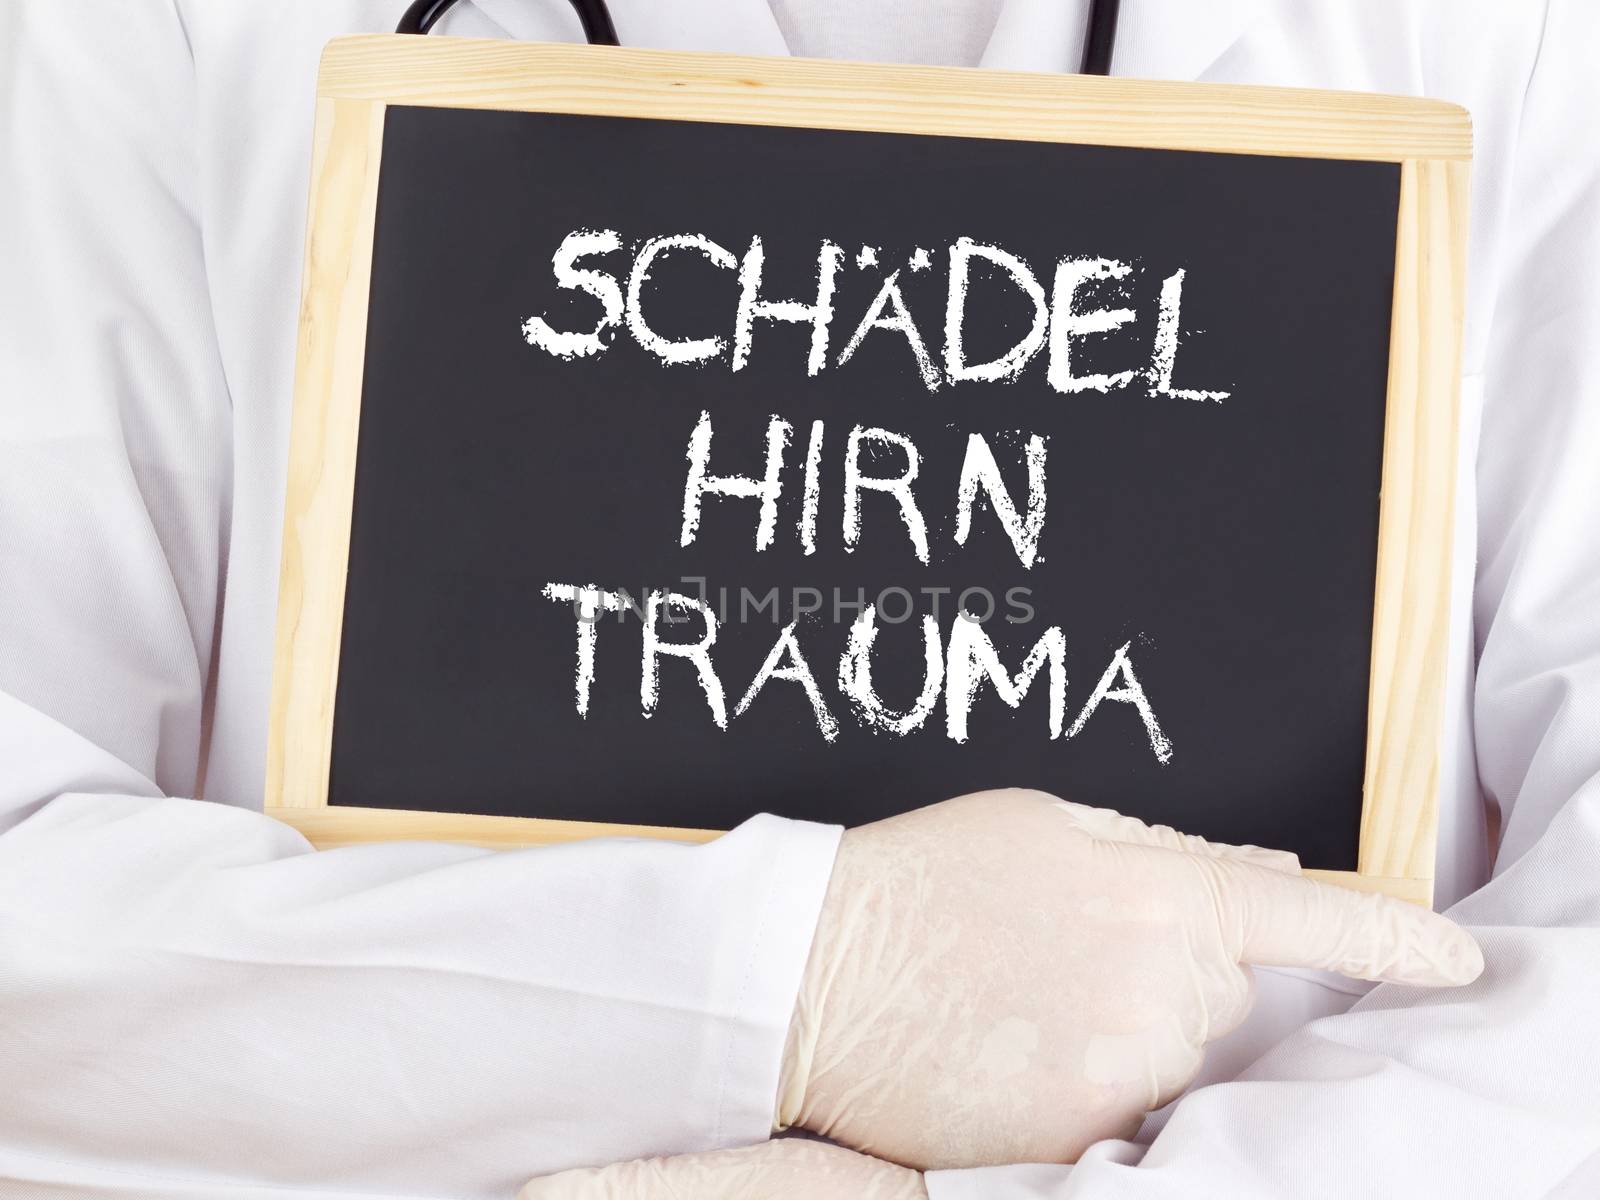 Doctor shows information: traumatic brain injury in german by gwolters